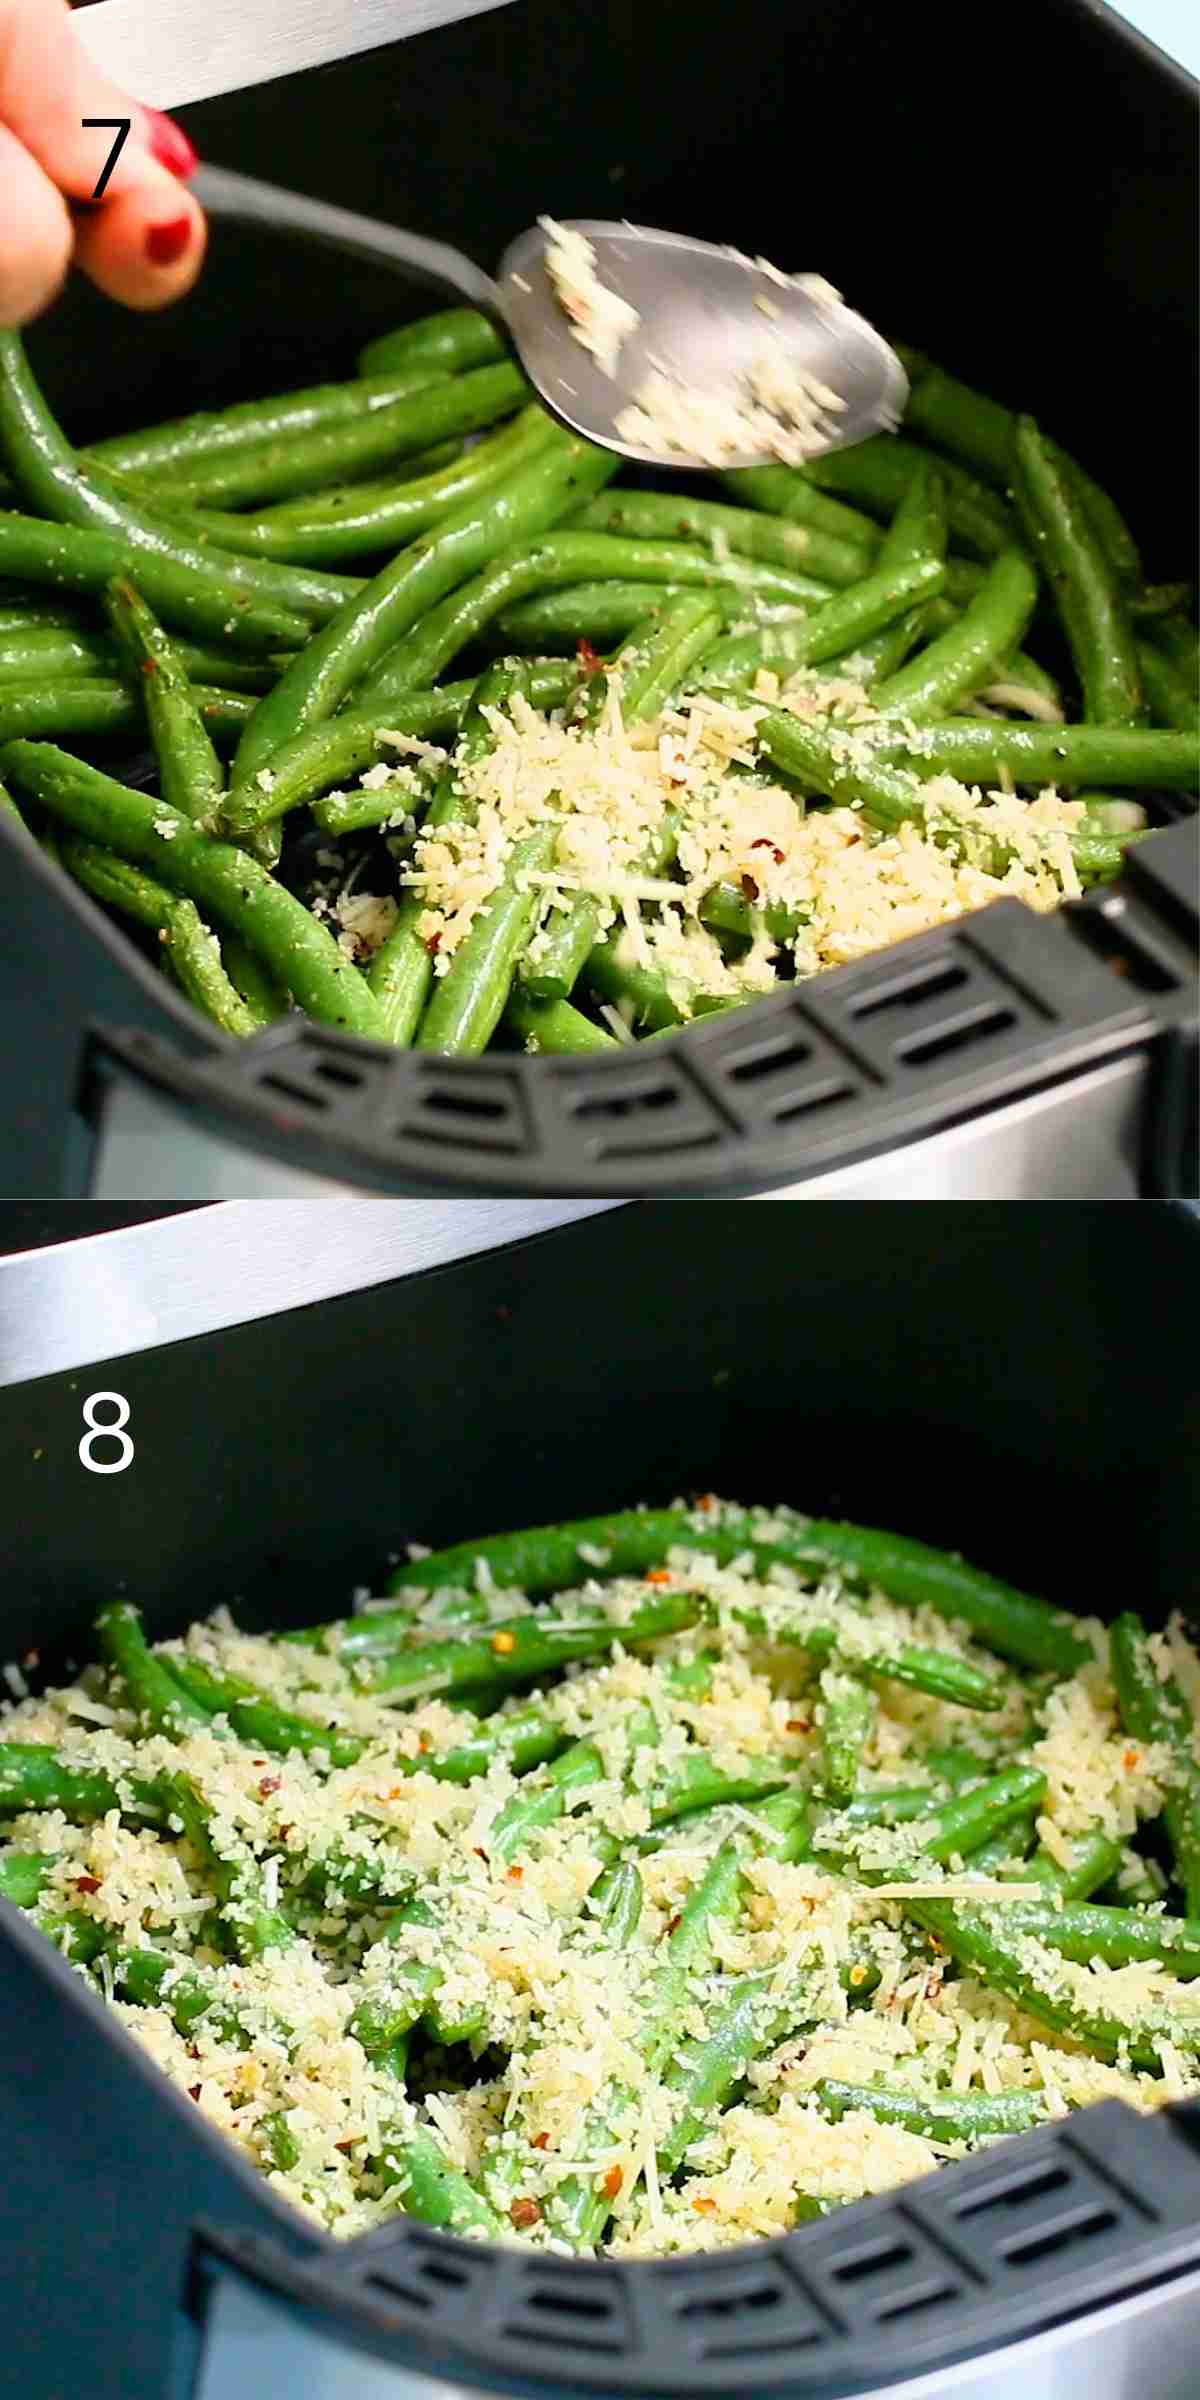 cooked green beans in an air fryer basket.